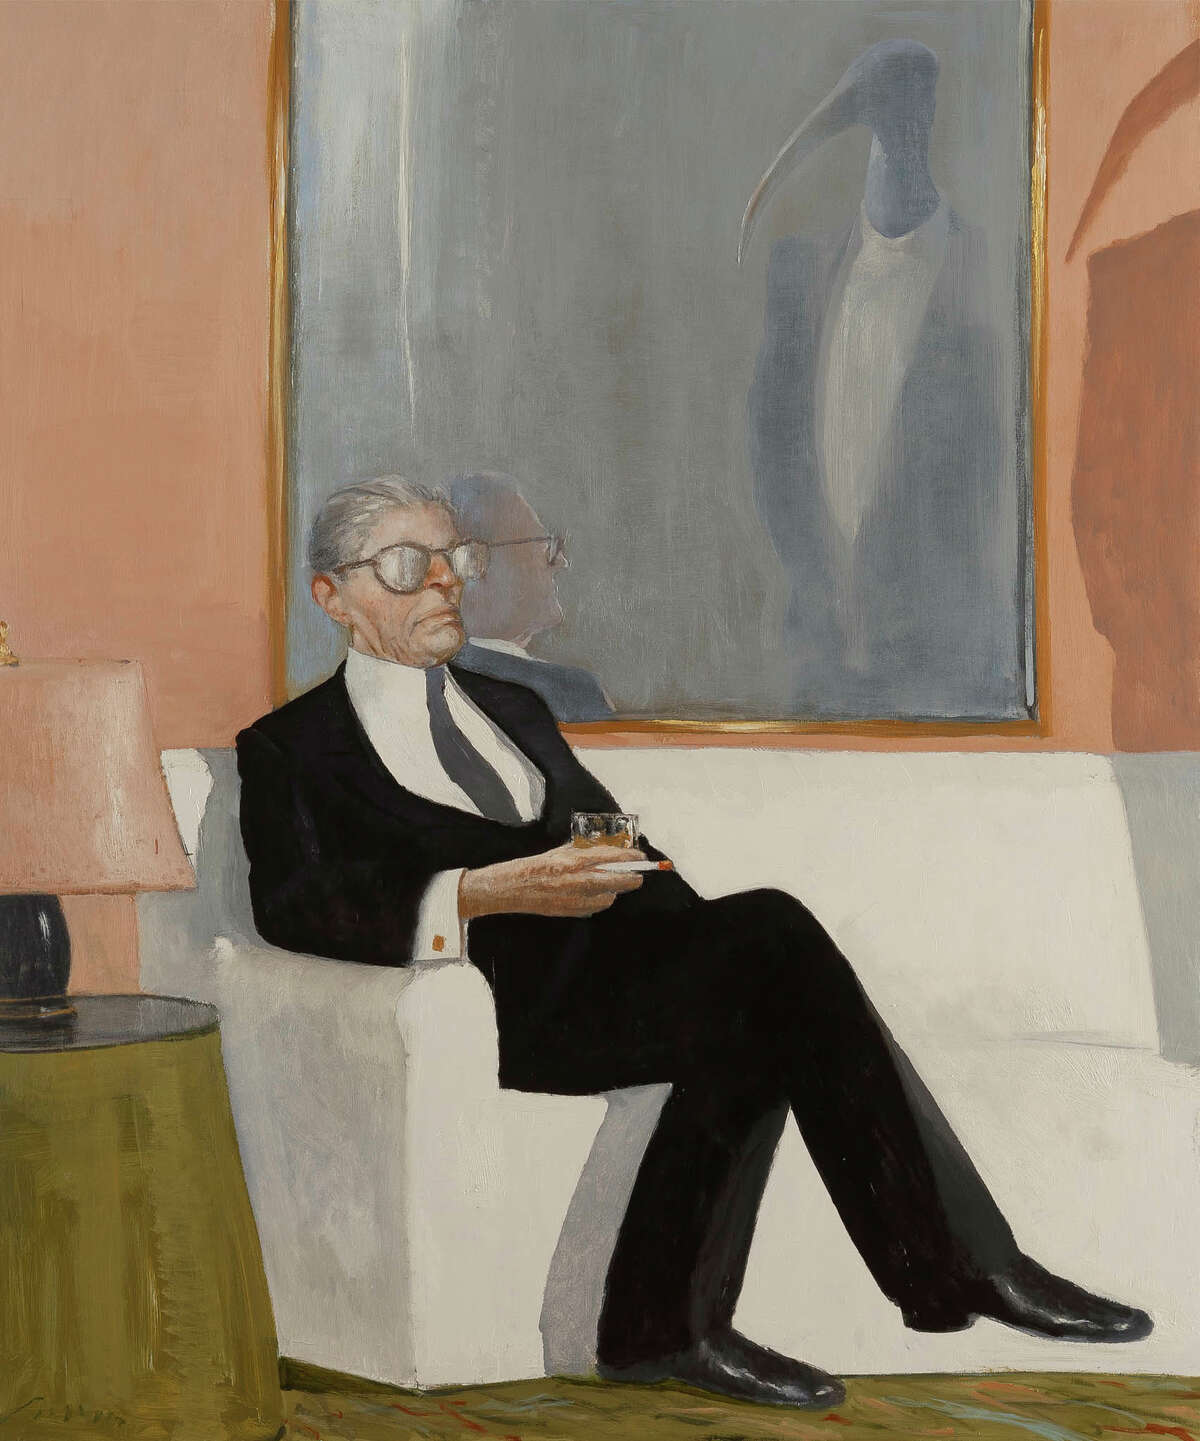 "A Man and His Drink" by Julio Larraz